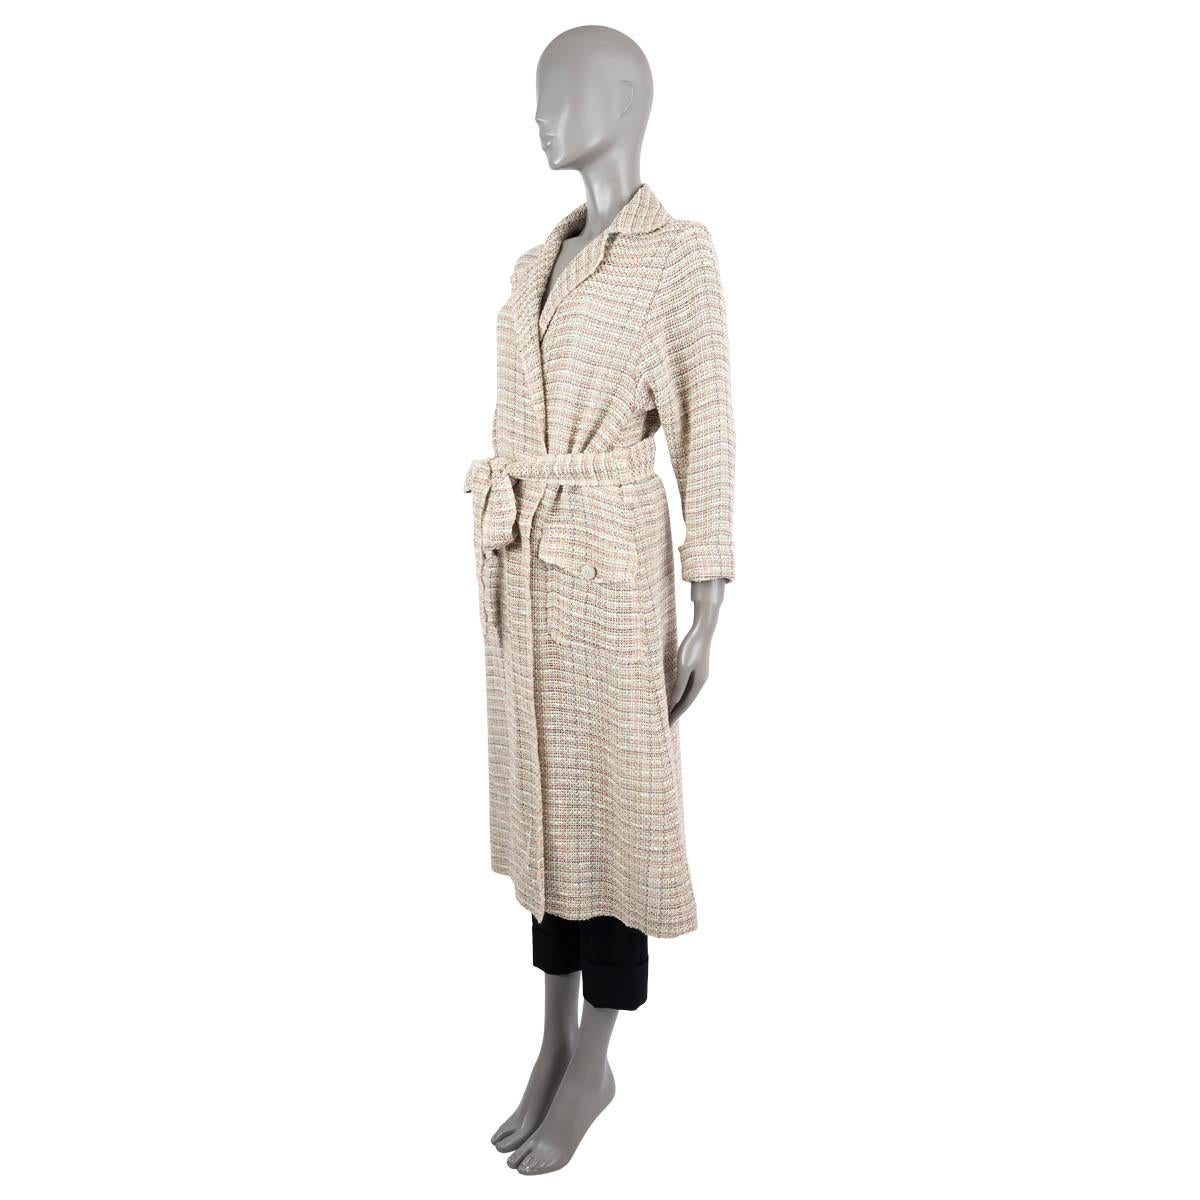 100% authentic Chanel tweed coat in beige, ivory, green and coral cotton (45%), linen (27%), nylon (14%)  and acrylic (14%). Features two flap pockets with logo engraved metal buttons. Closes with a matching belt and is lined in cotton (75%) and